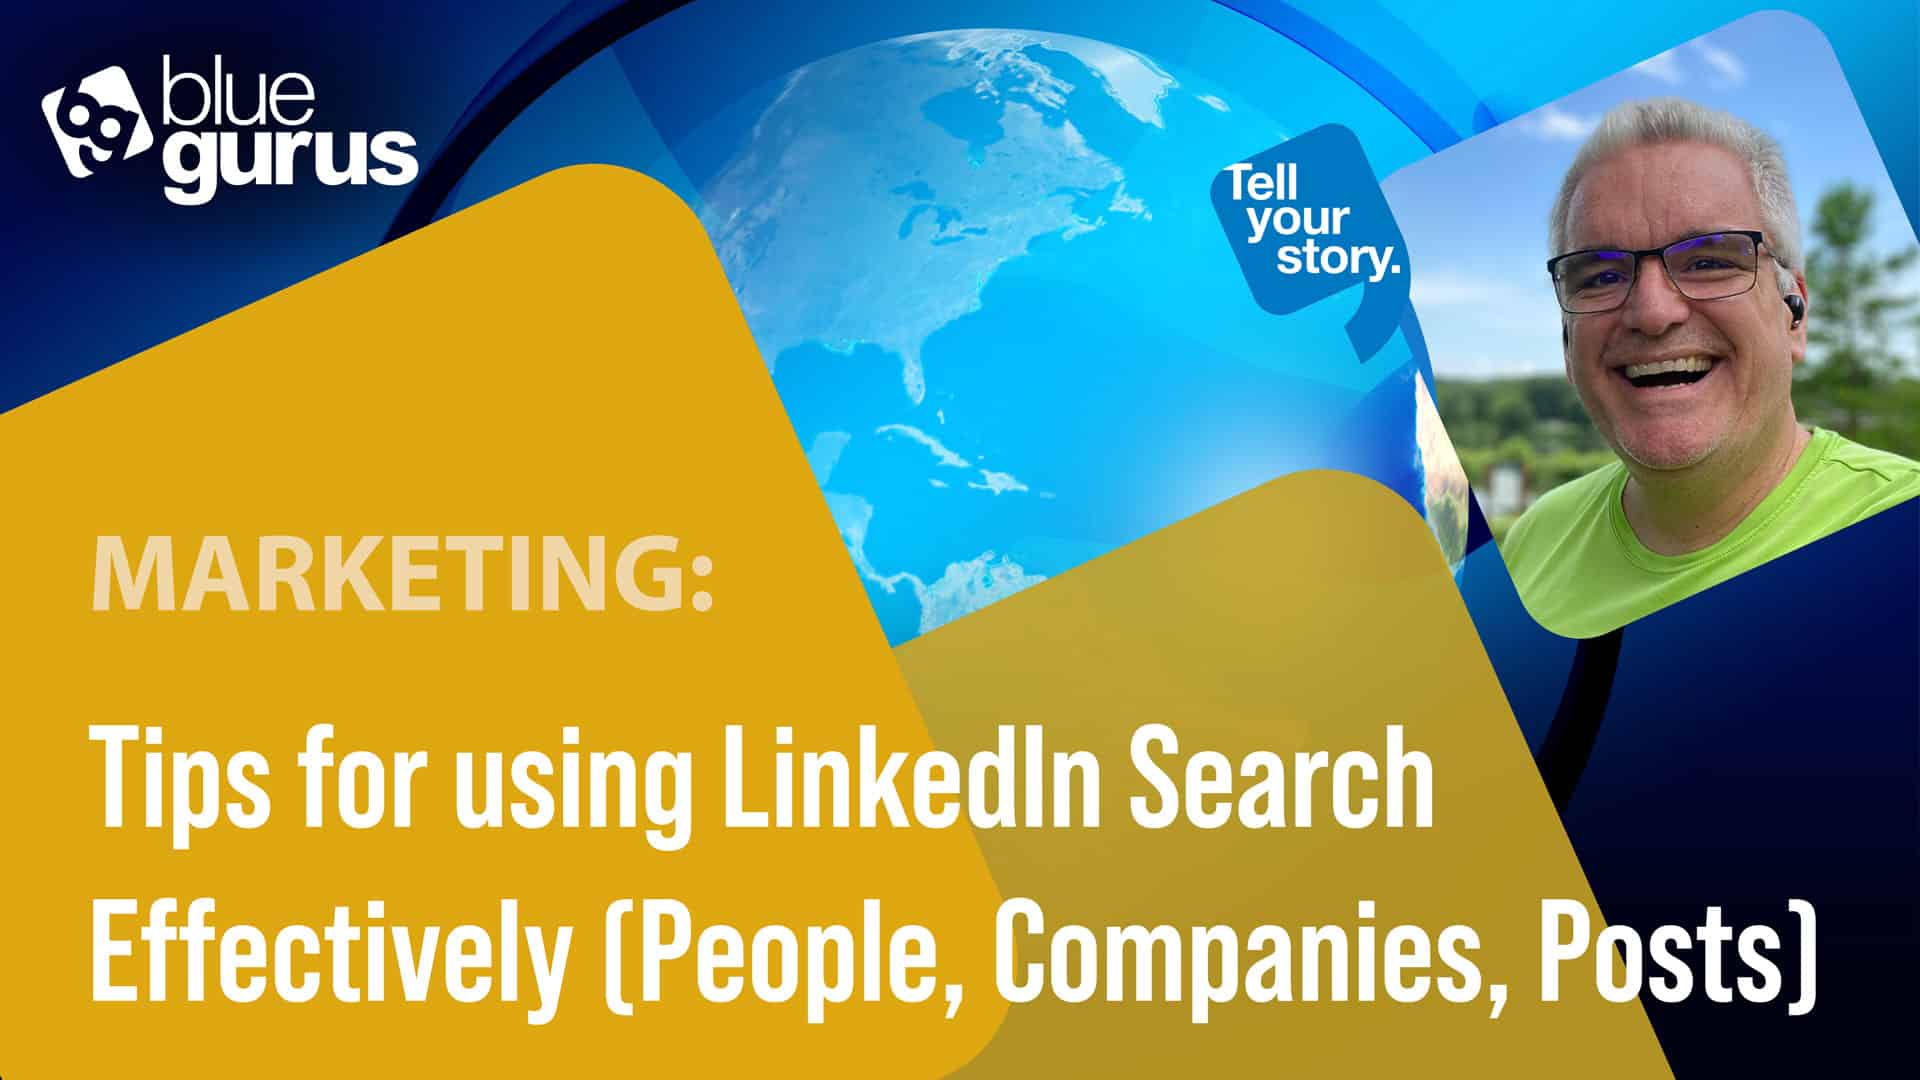 Marketing: Tips for using LinkedIn Search Effectively (People, Companies, Posts)